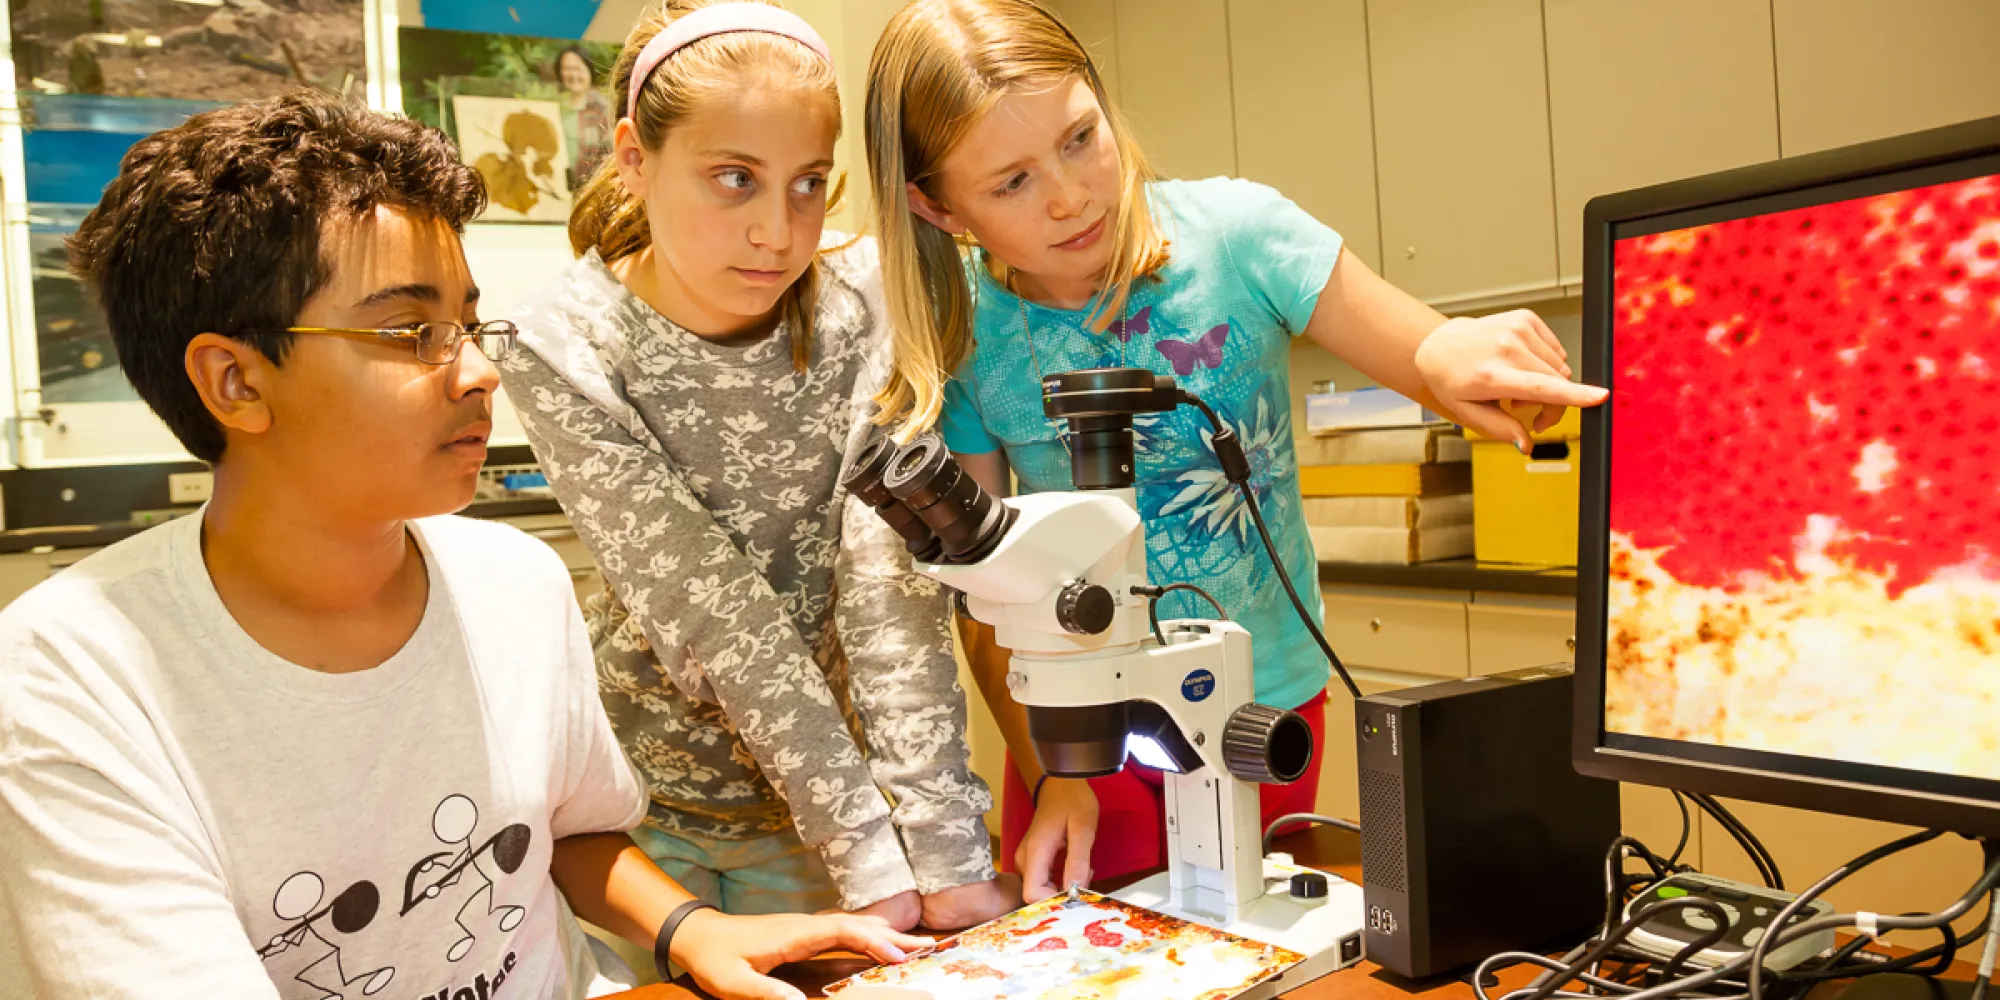 Three teenage students gathered by a microscope on a table, looking at an enlarged display on a monitor.